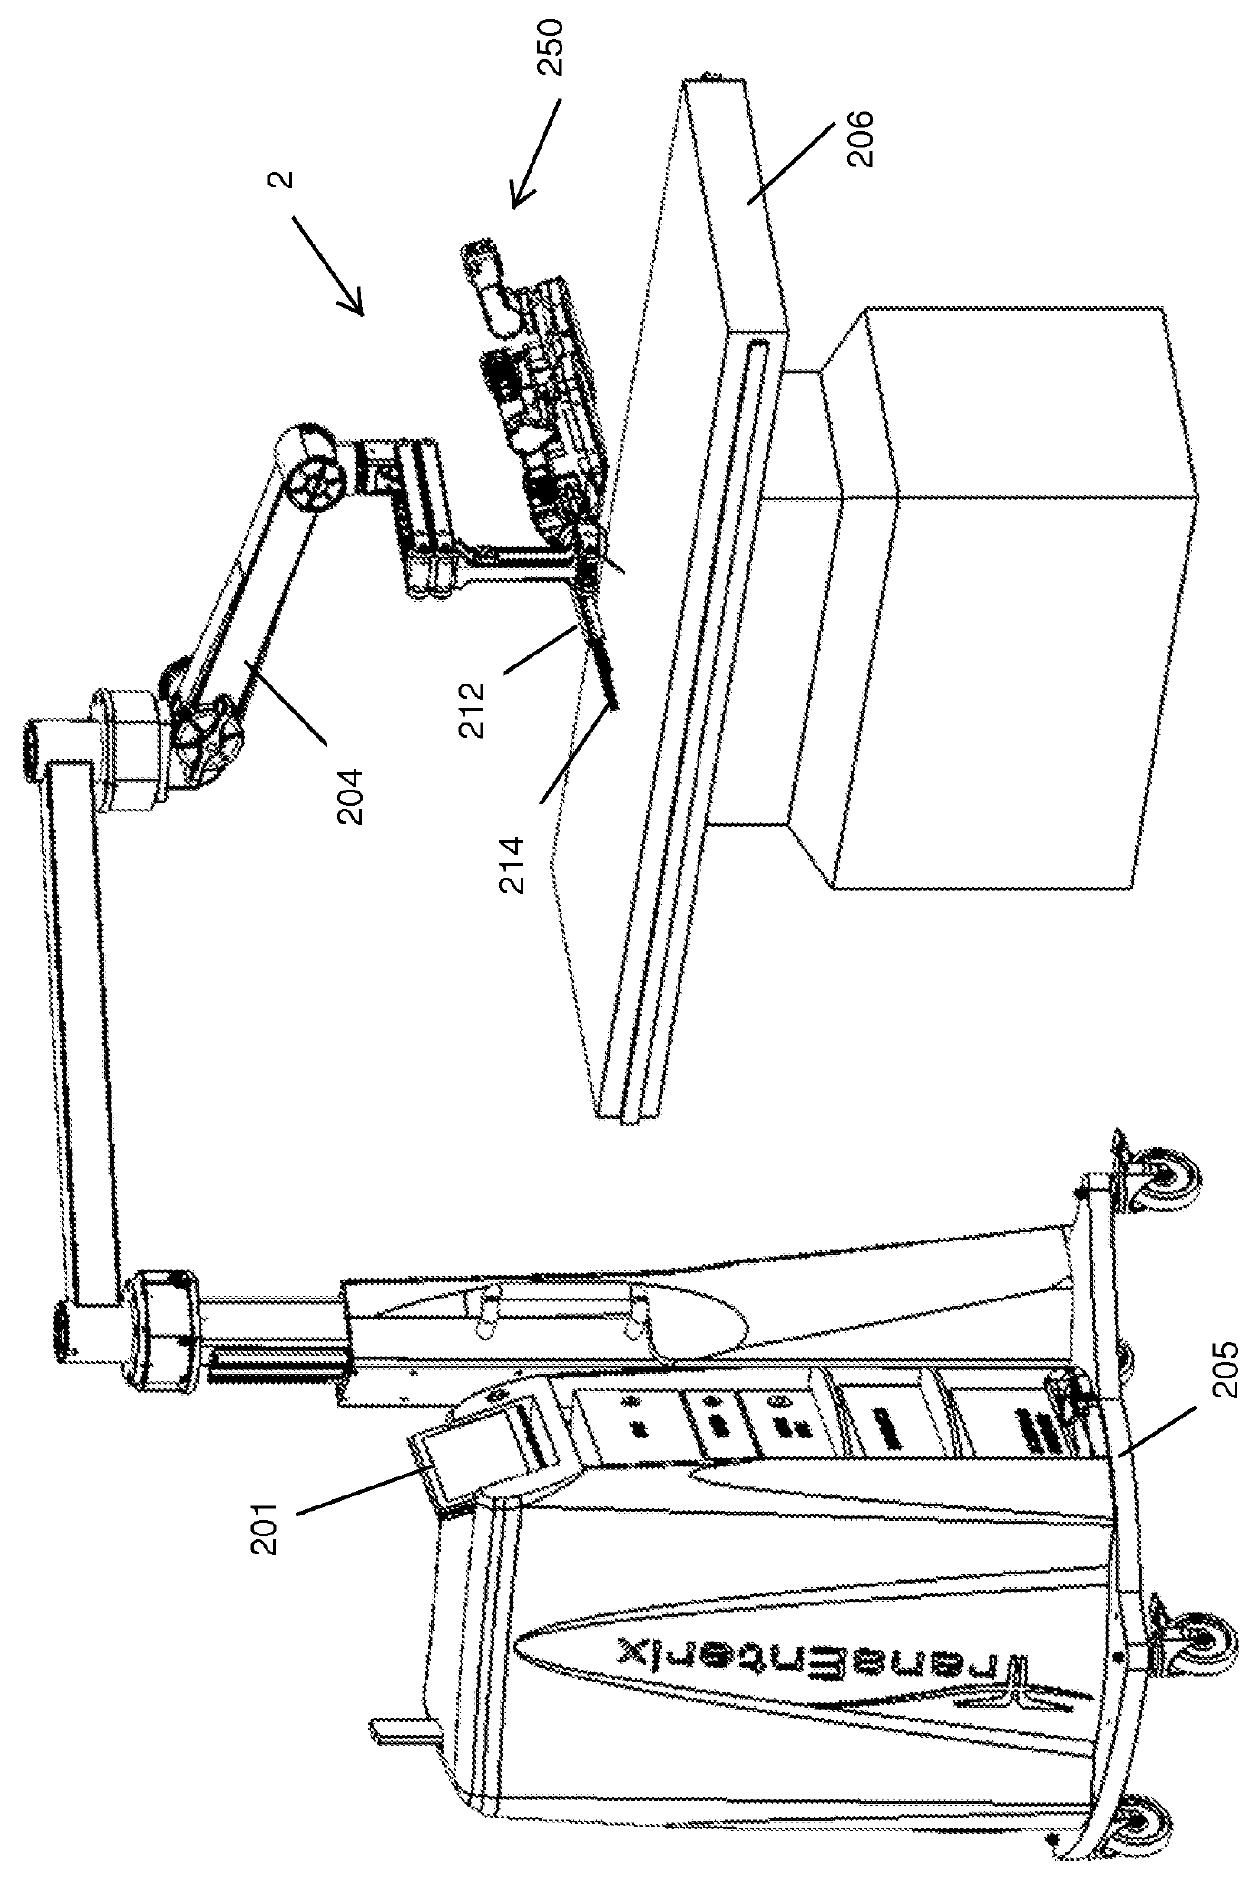 Mechanized multi-instrument surgical system